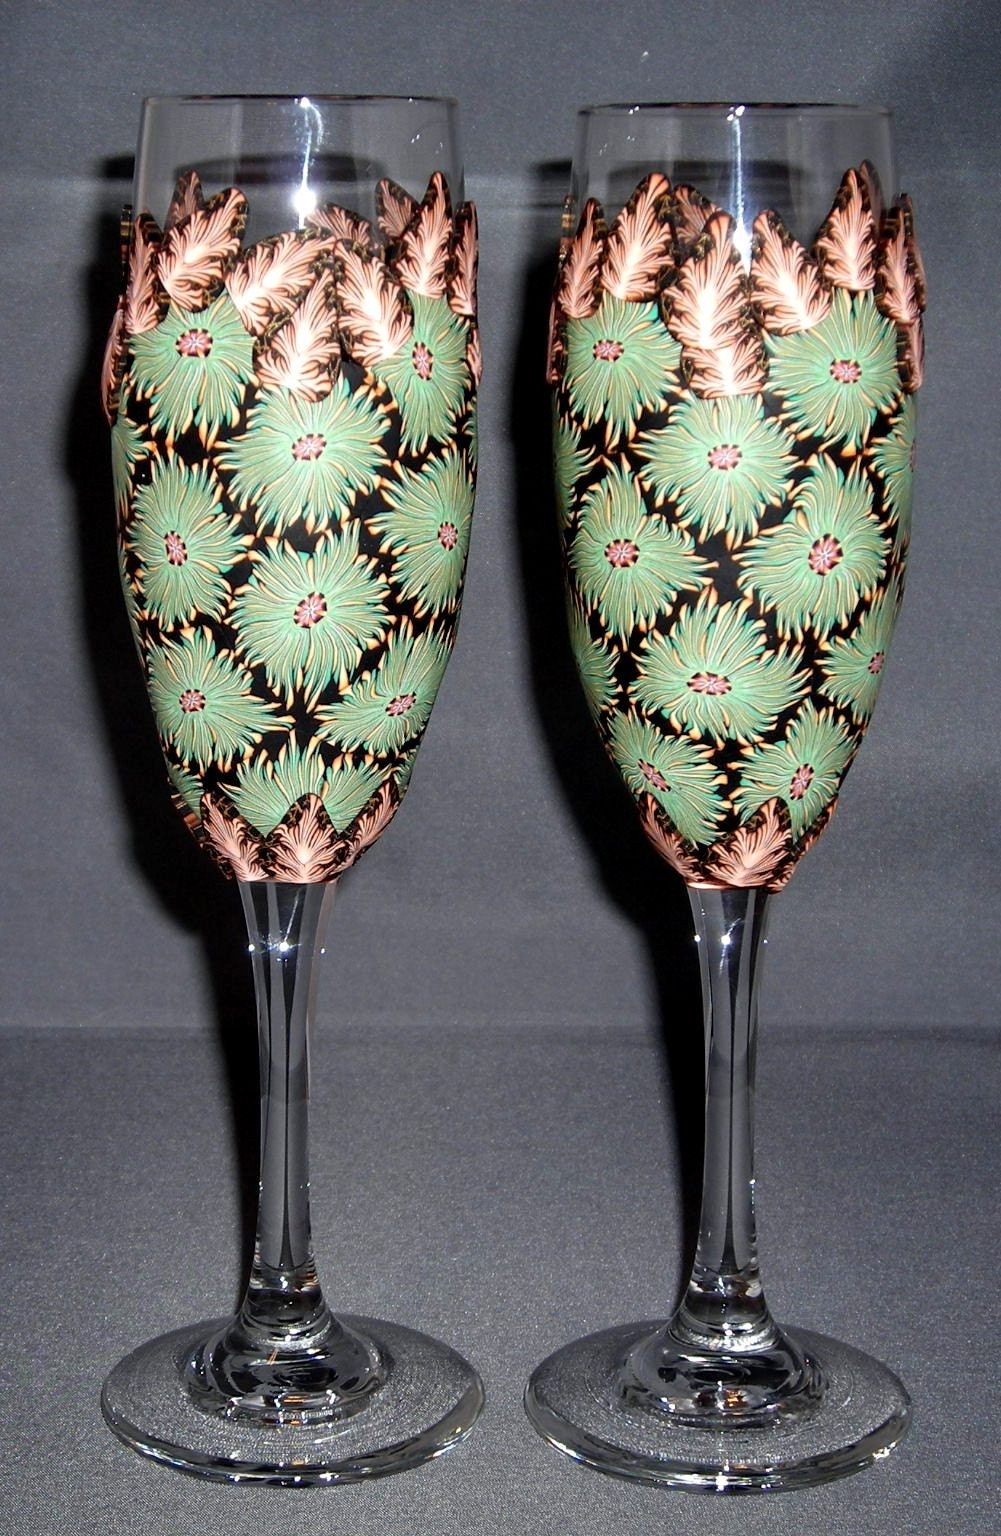 Handmade Polymer Clay Wedding Toasting Flutes One of a Kind Lovely